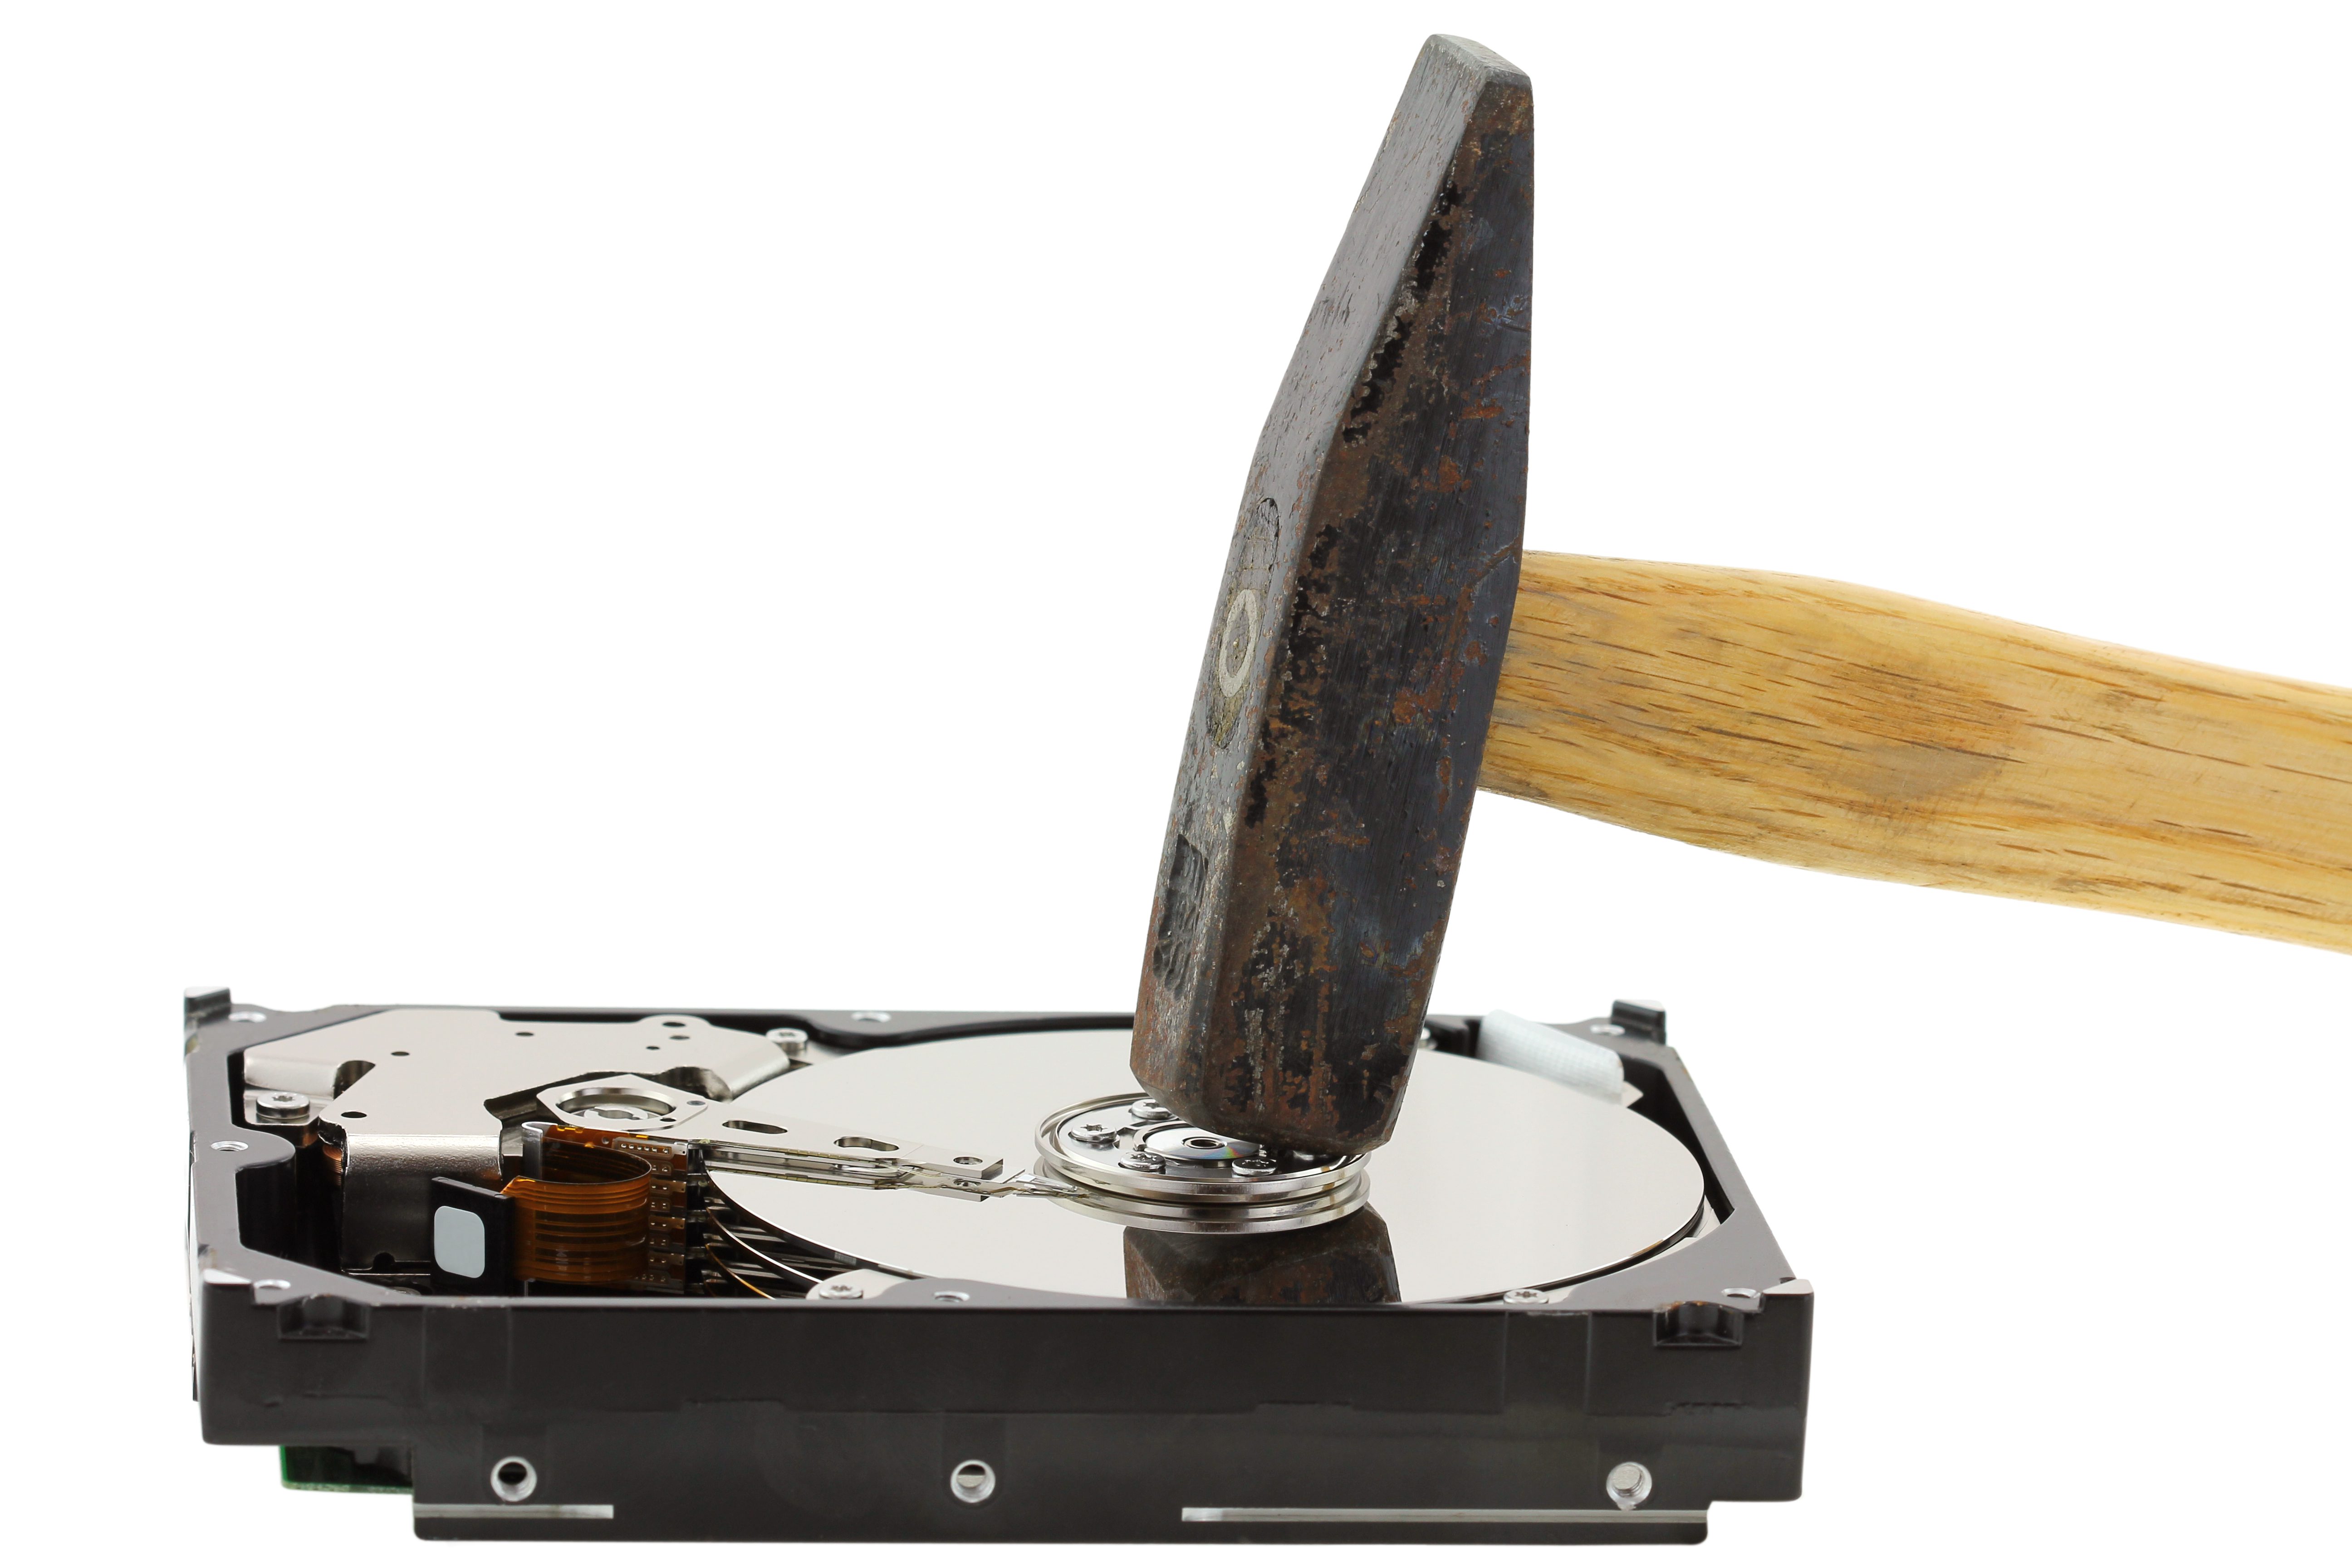 What You Need to Know About Data Destruction